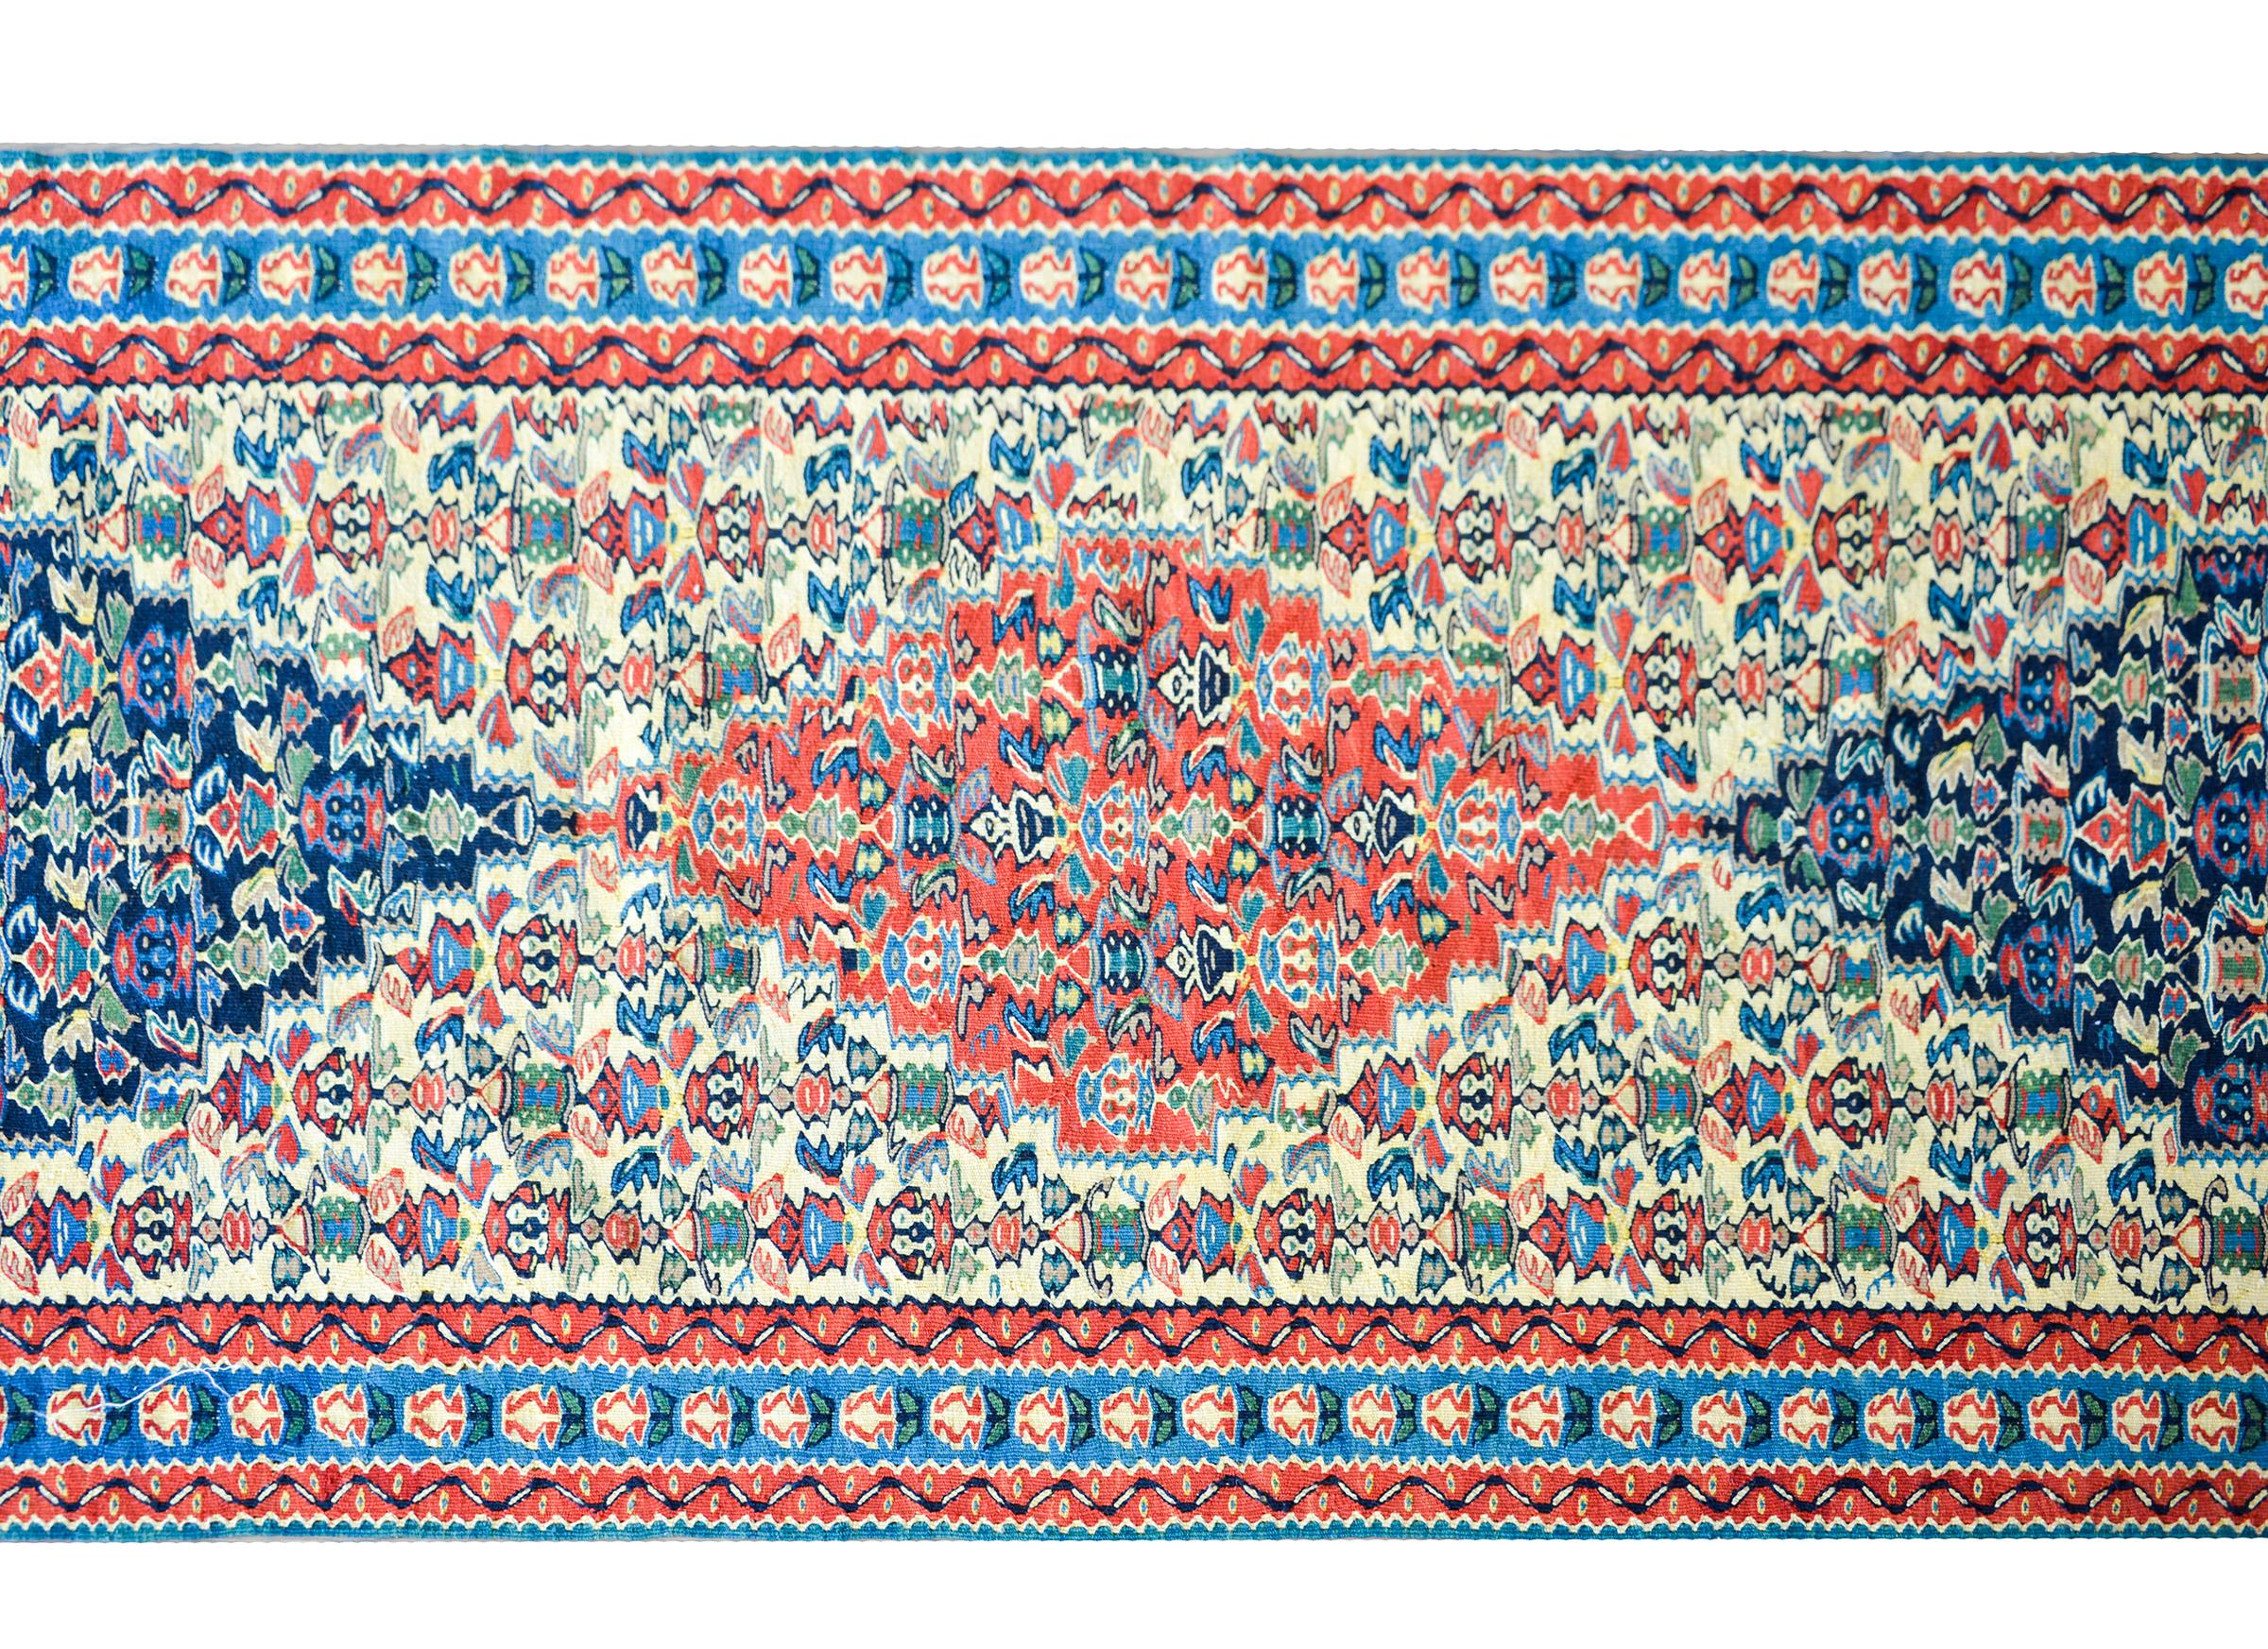 An incredible vintage Persian Senneh kilim runner with the most intensely woven all-over floral pattern with several diamond medallion in crimson and indigo amidst a yellow background. The border is beautiful with a simple petite floral patterned